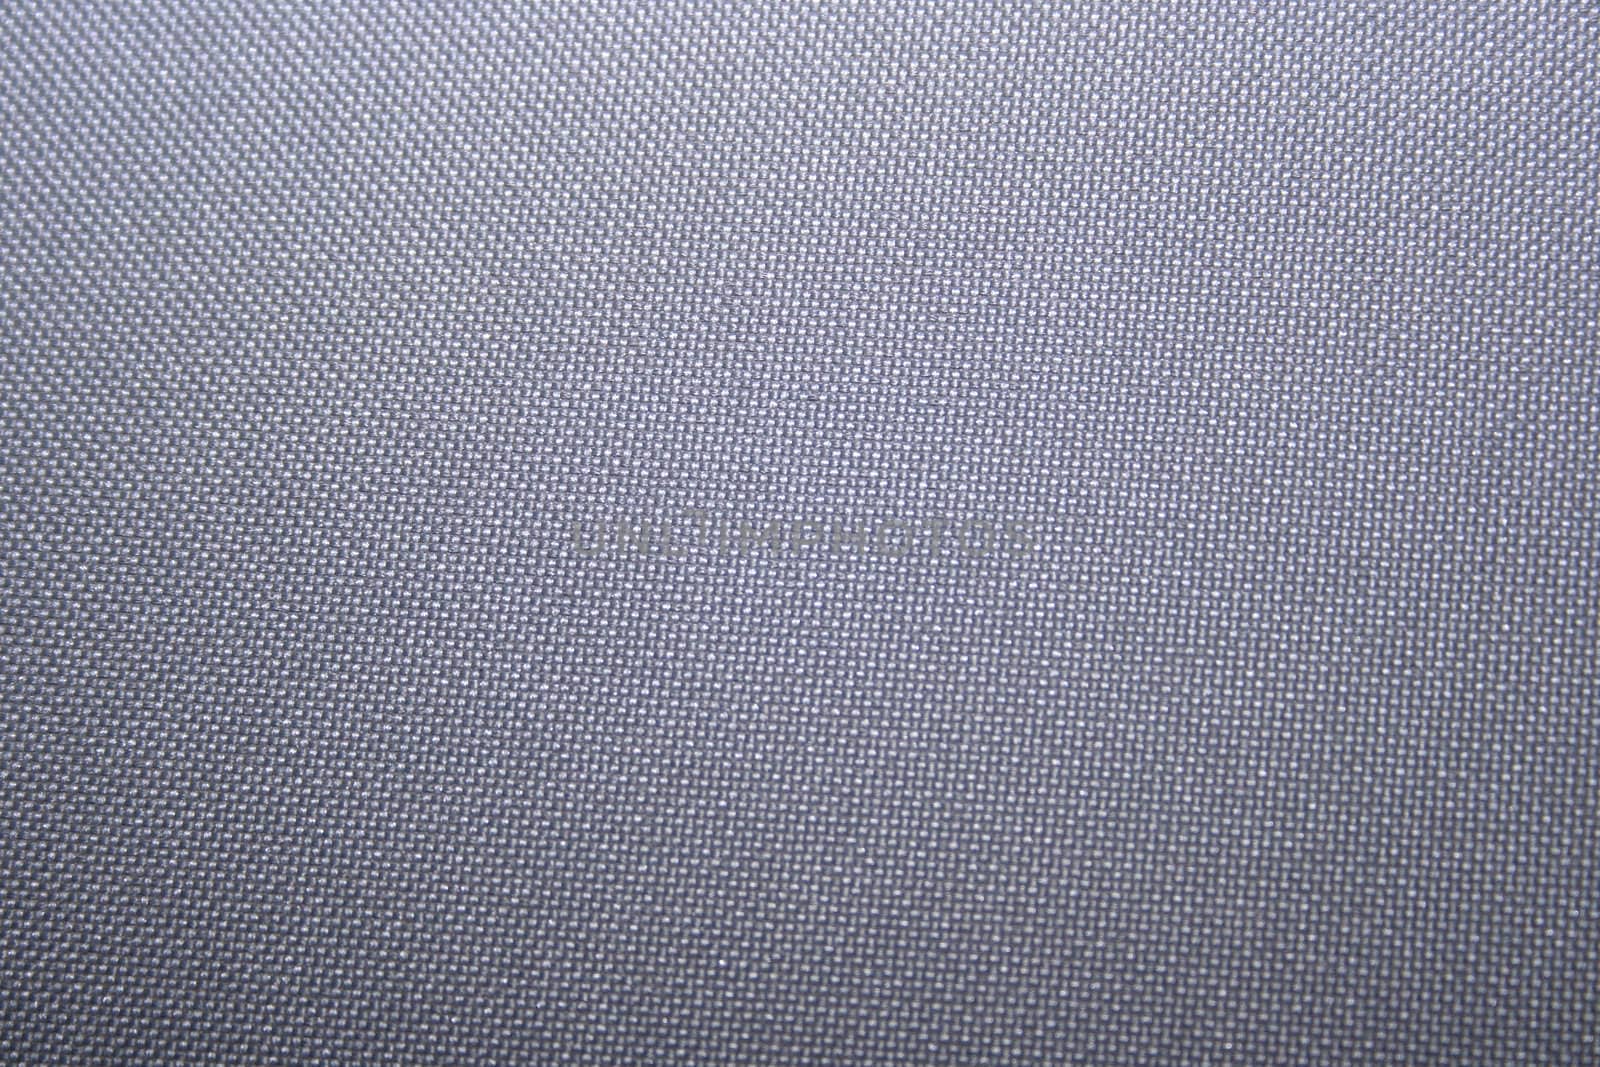 Texture of a grey thick cloth fabric